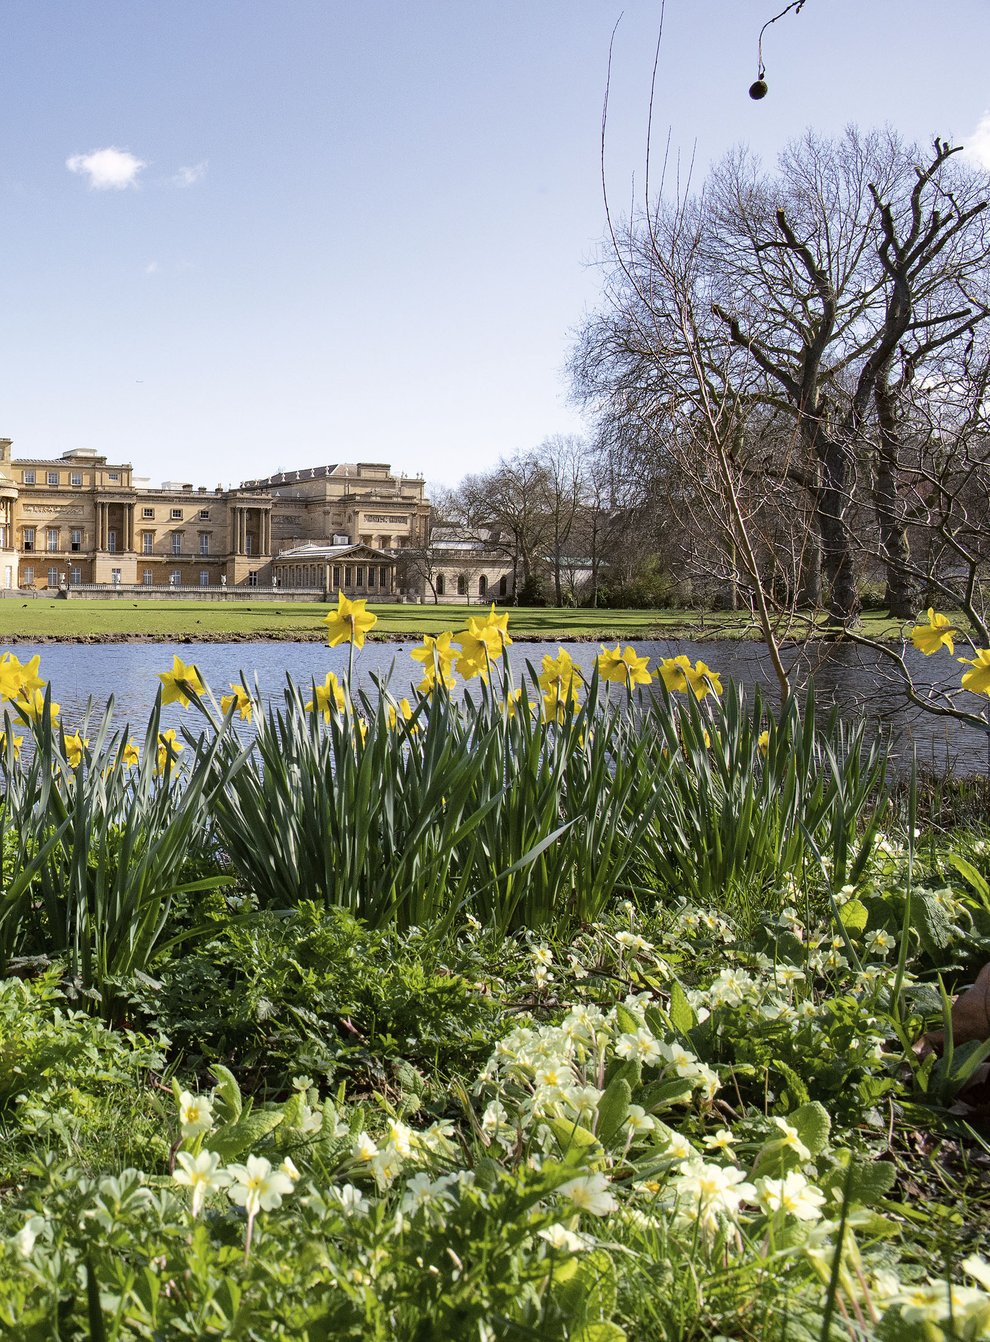 The garden at Buckingham Palace in spring